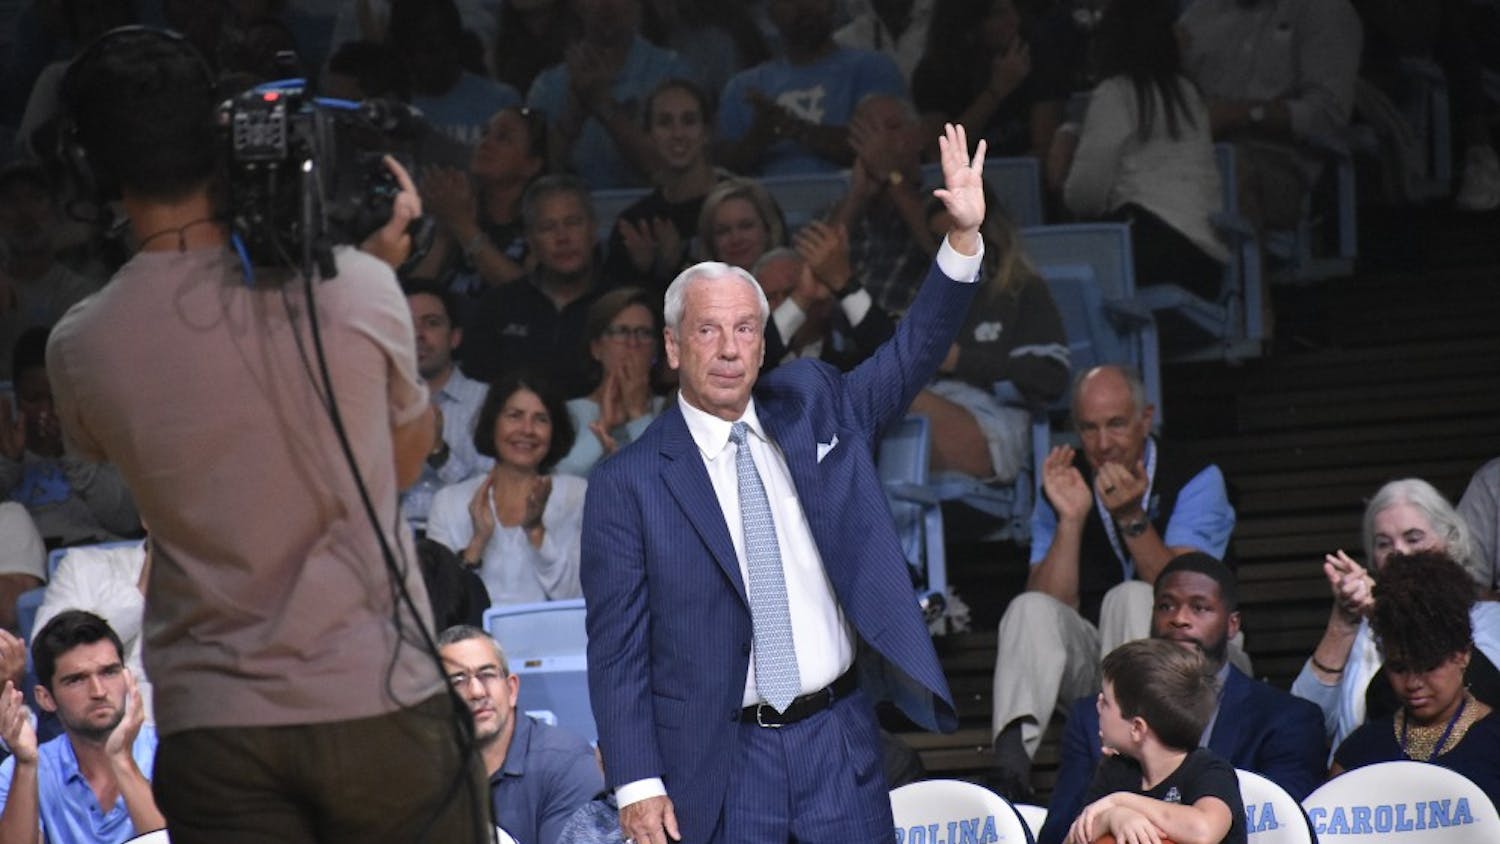 UNC men's basketball head coach Roy Williams waves to the crowd during Late Night with Roy on Oct. 12 at the Smith Center.